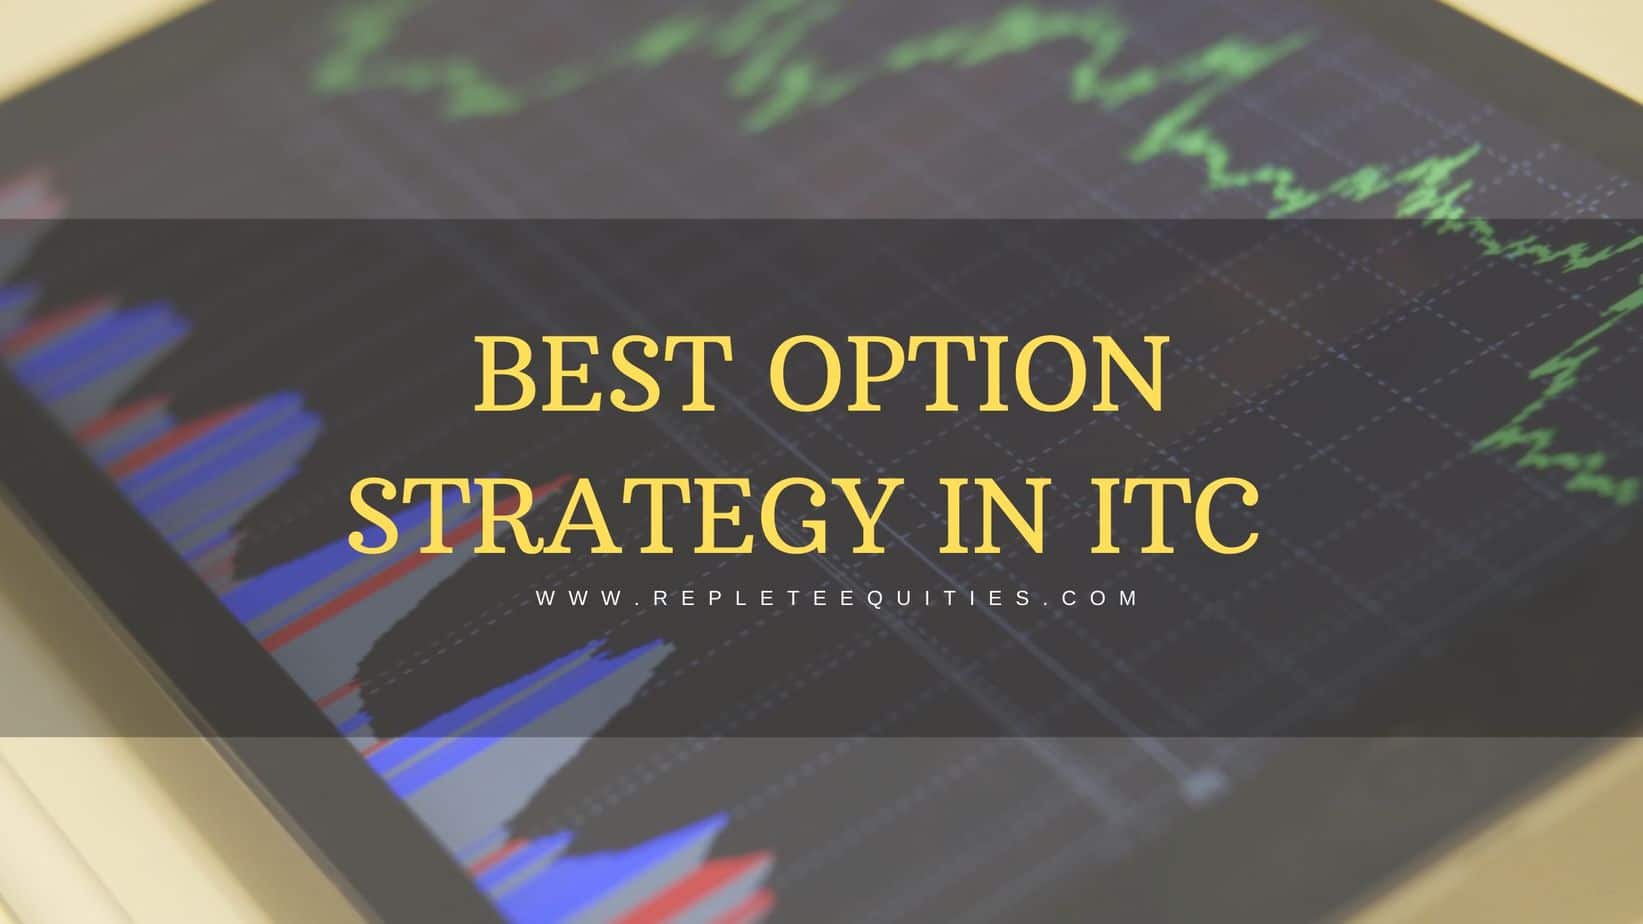 The best options strategy in ITC for July 2020 Expiry